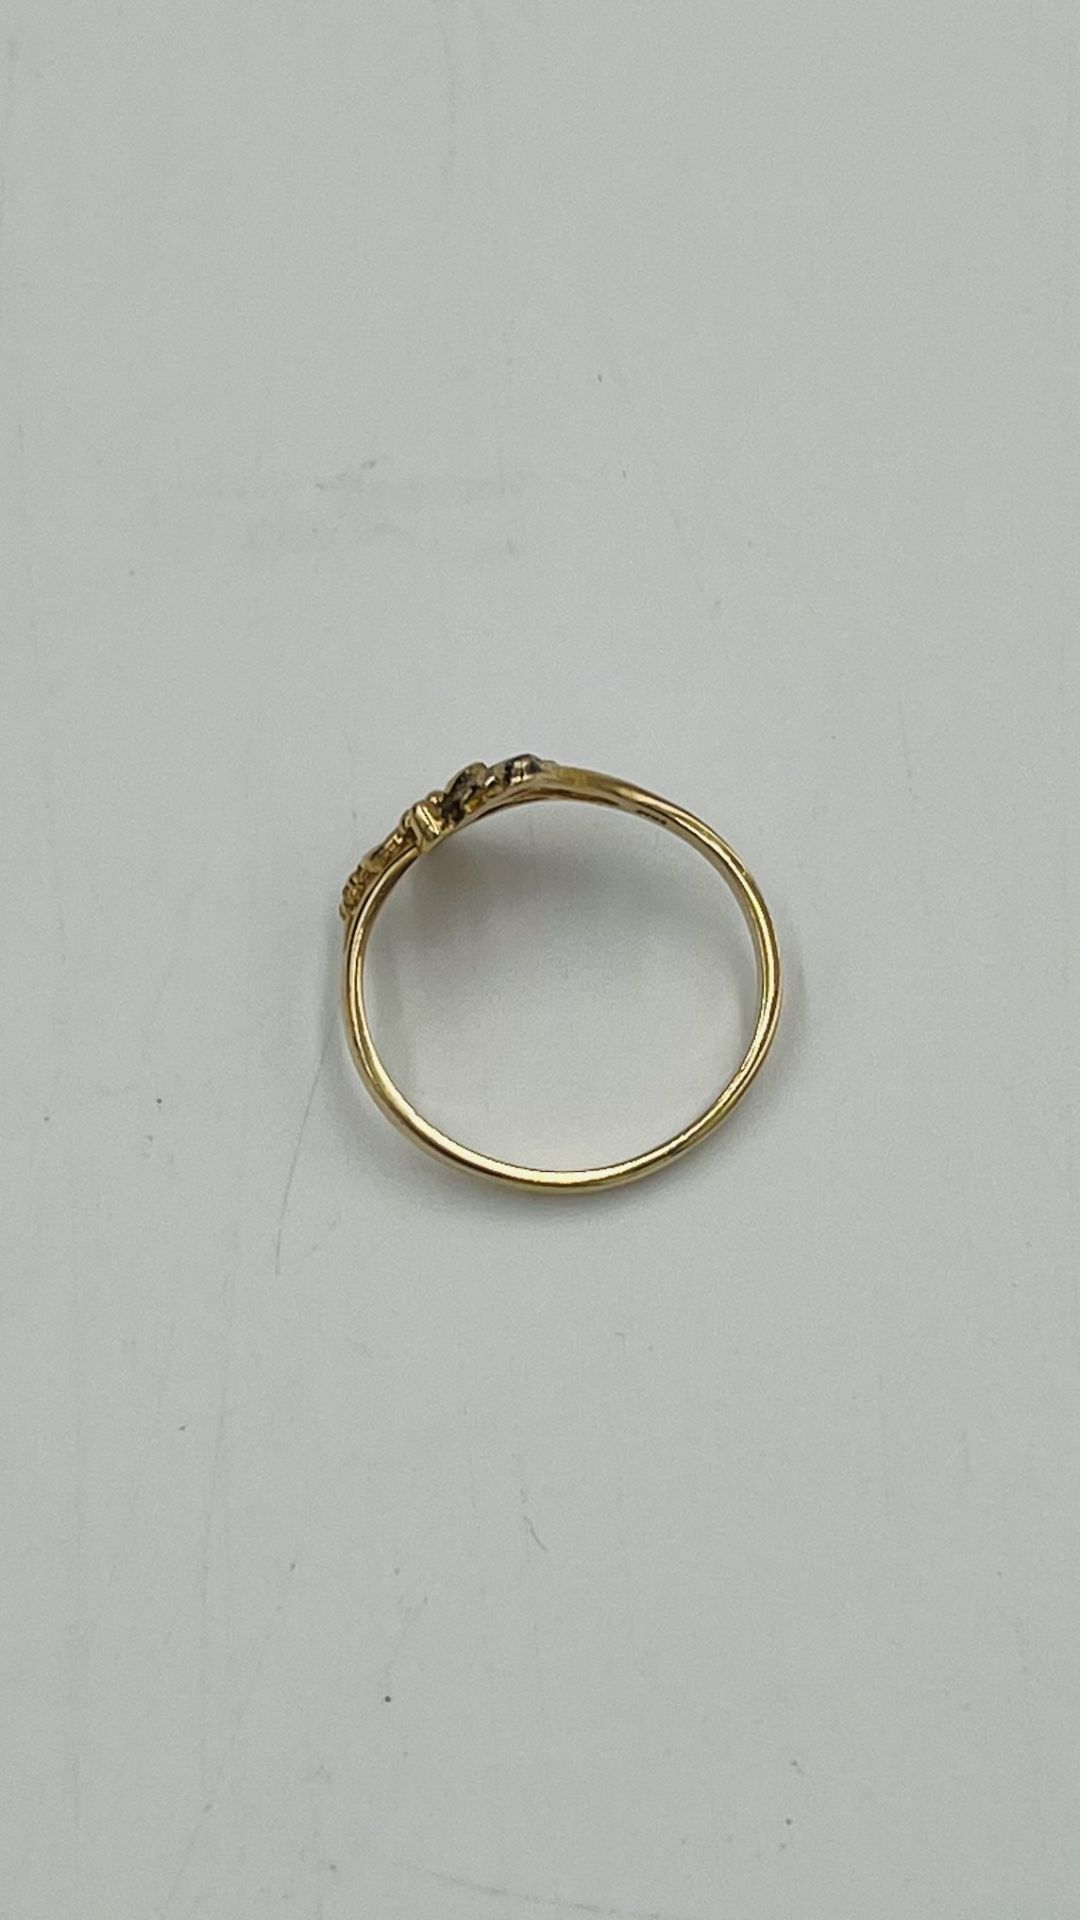 10ct gold ring together with a matching pair of 10ct gold earrings - Image 6 of 6